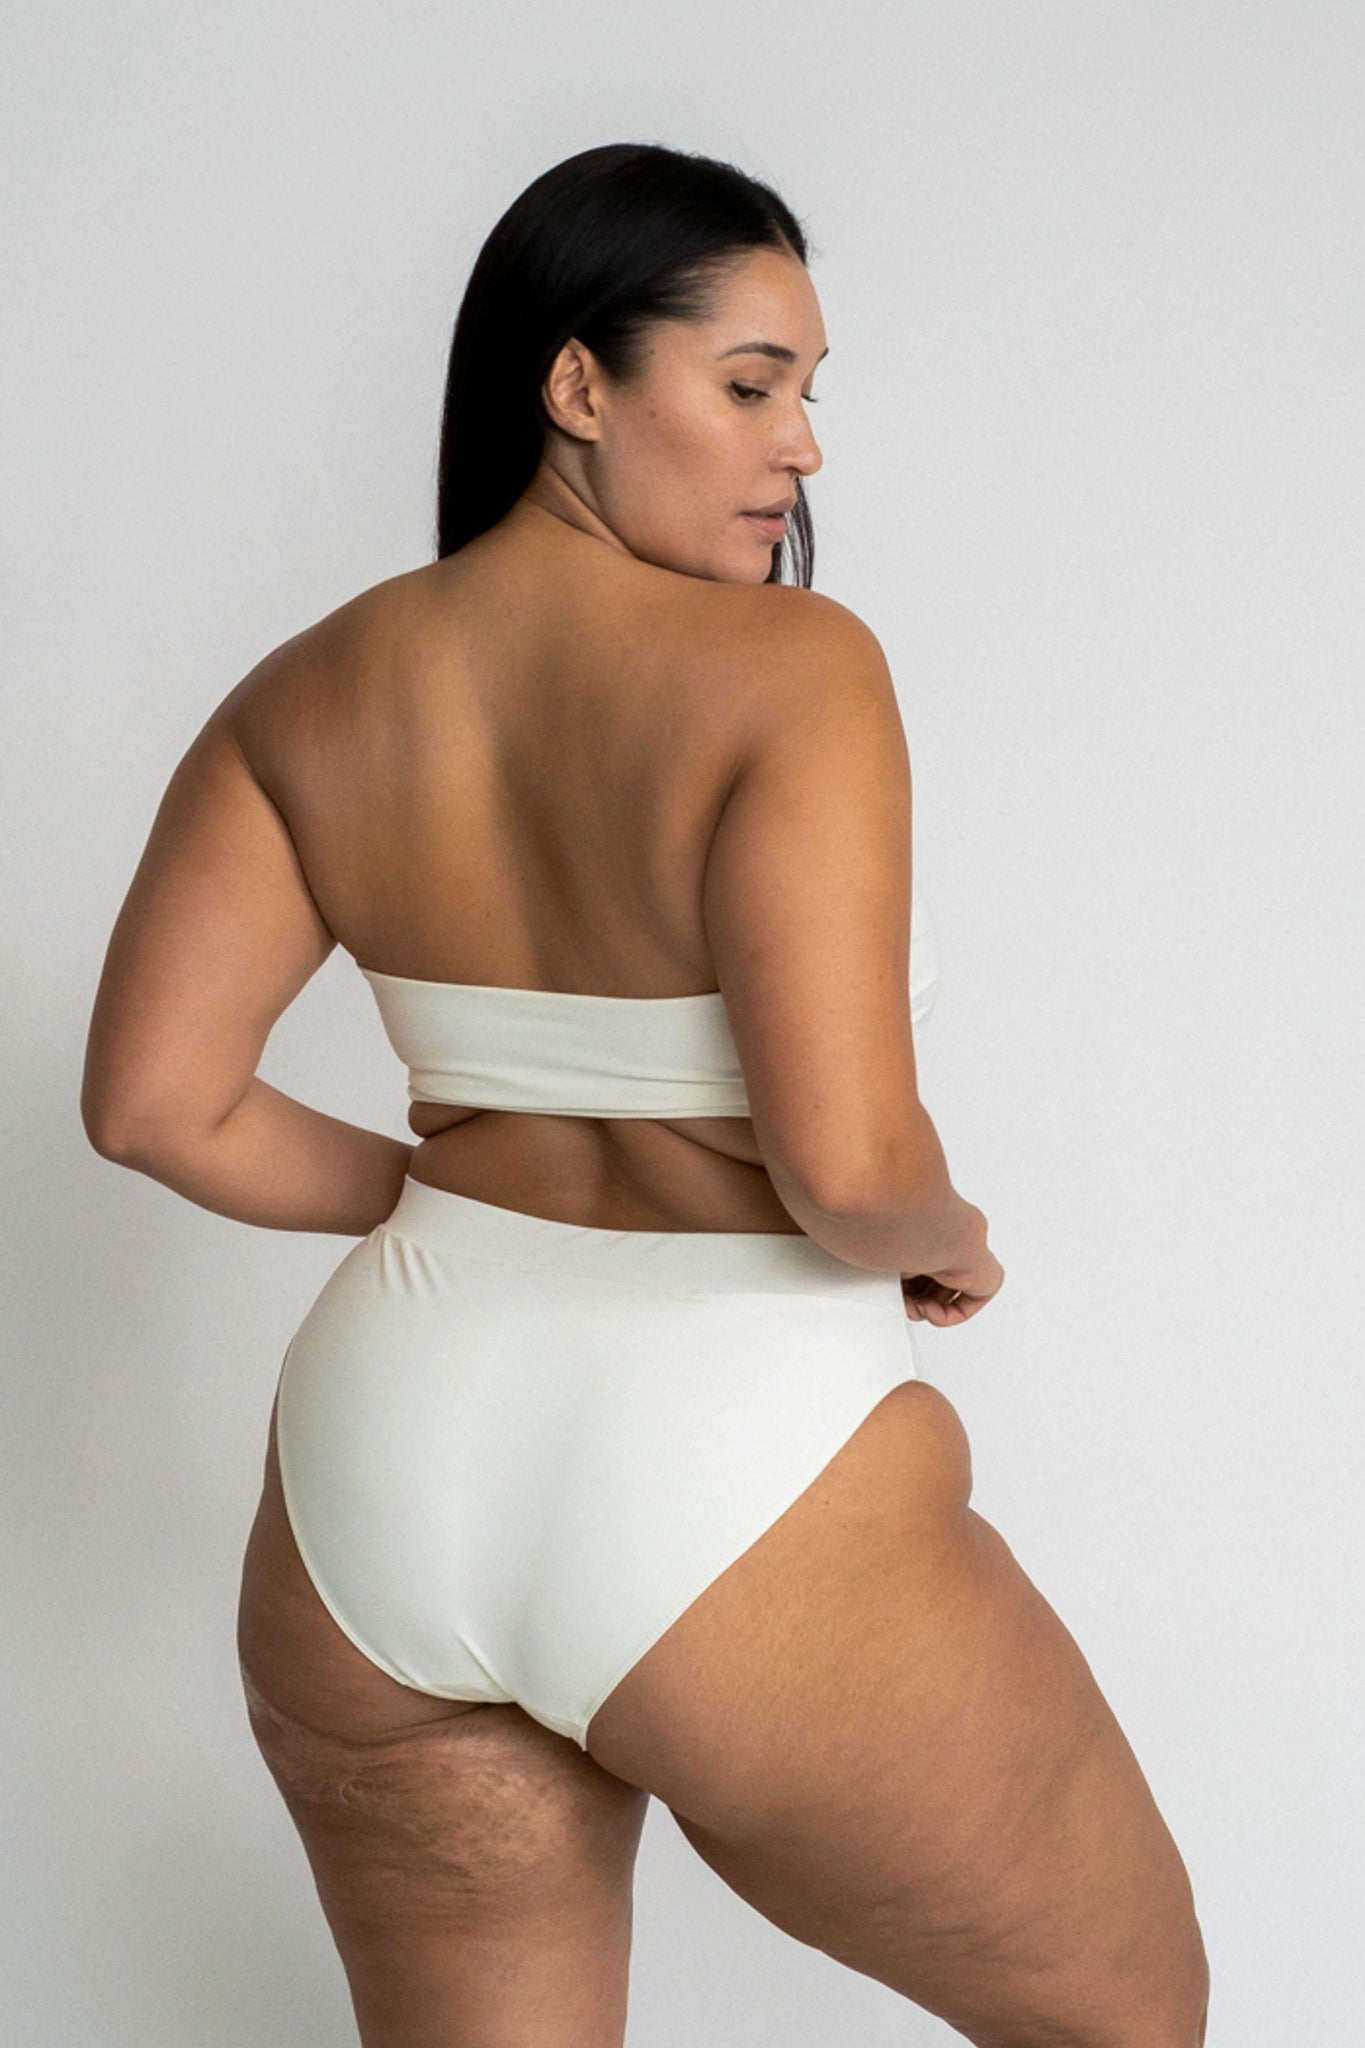 A woman standing in front of a white wall looking over her shoulder wearing white high waisted bikini bottoms with a matching white bandeau strapless bikini top.